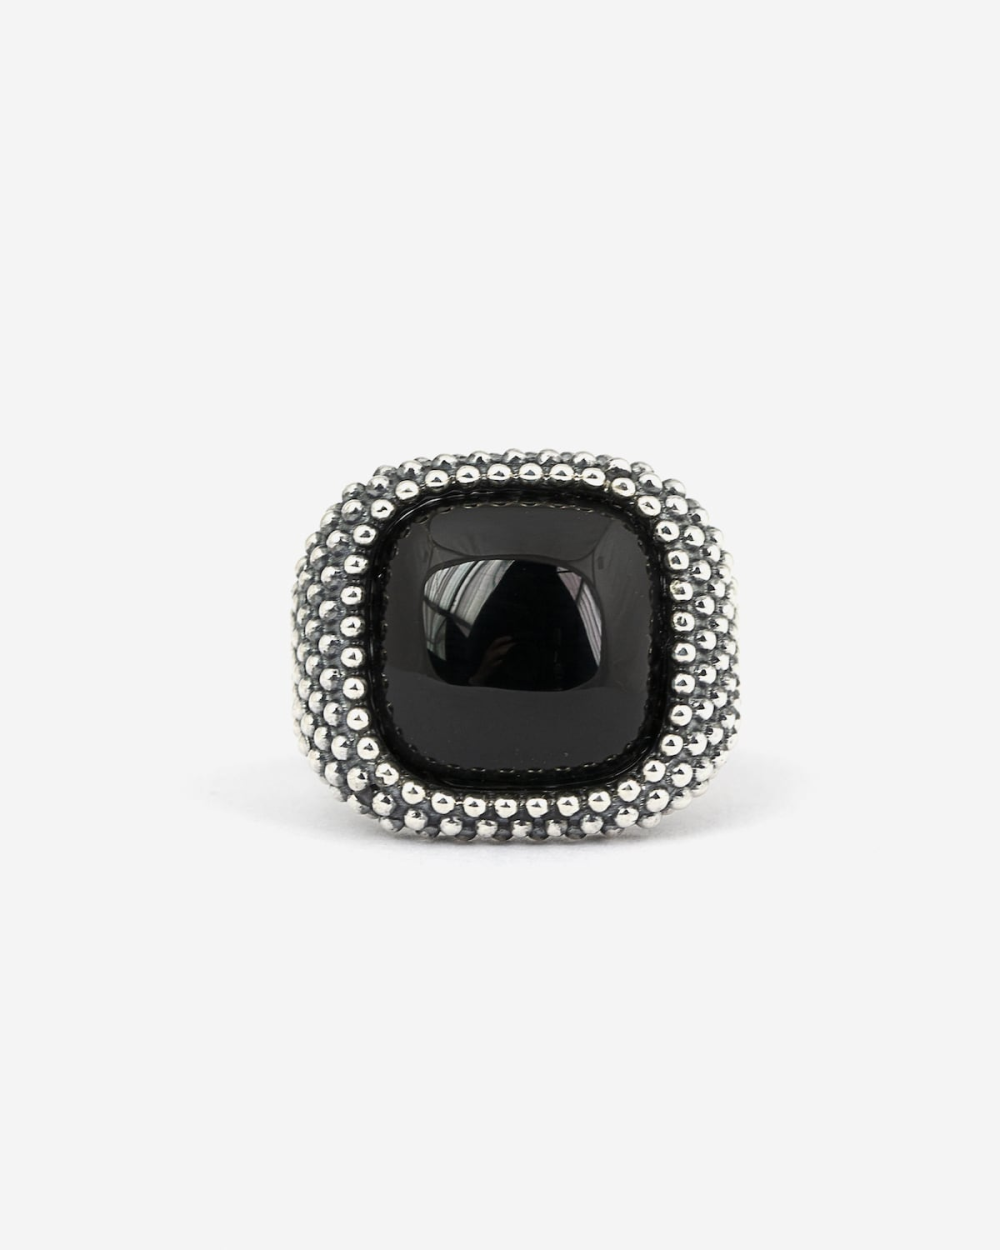 DOTTED SQUARE ONYX SIGNET RING